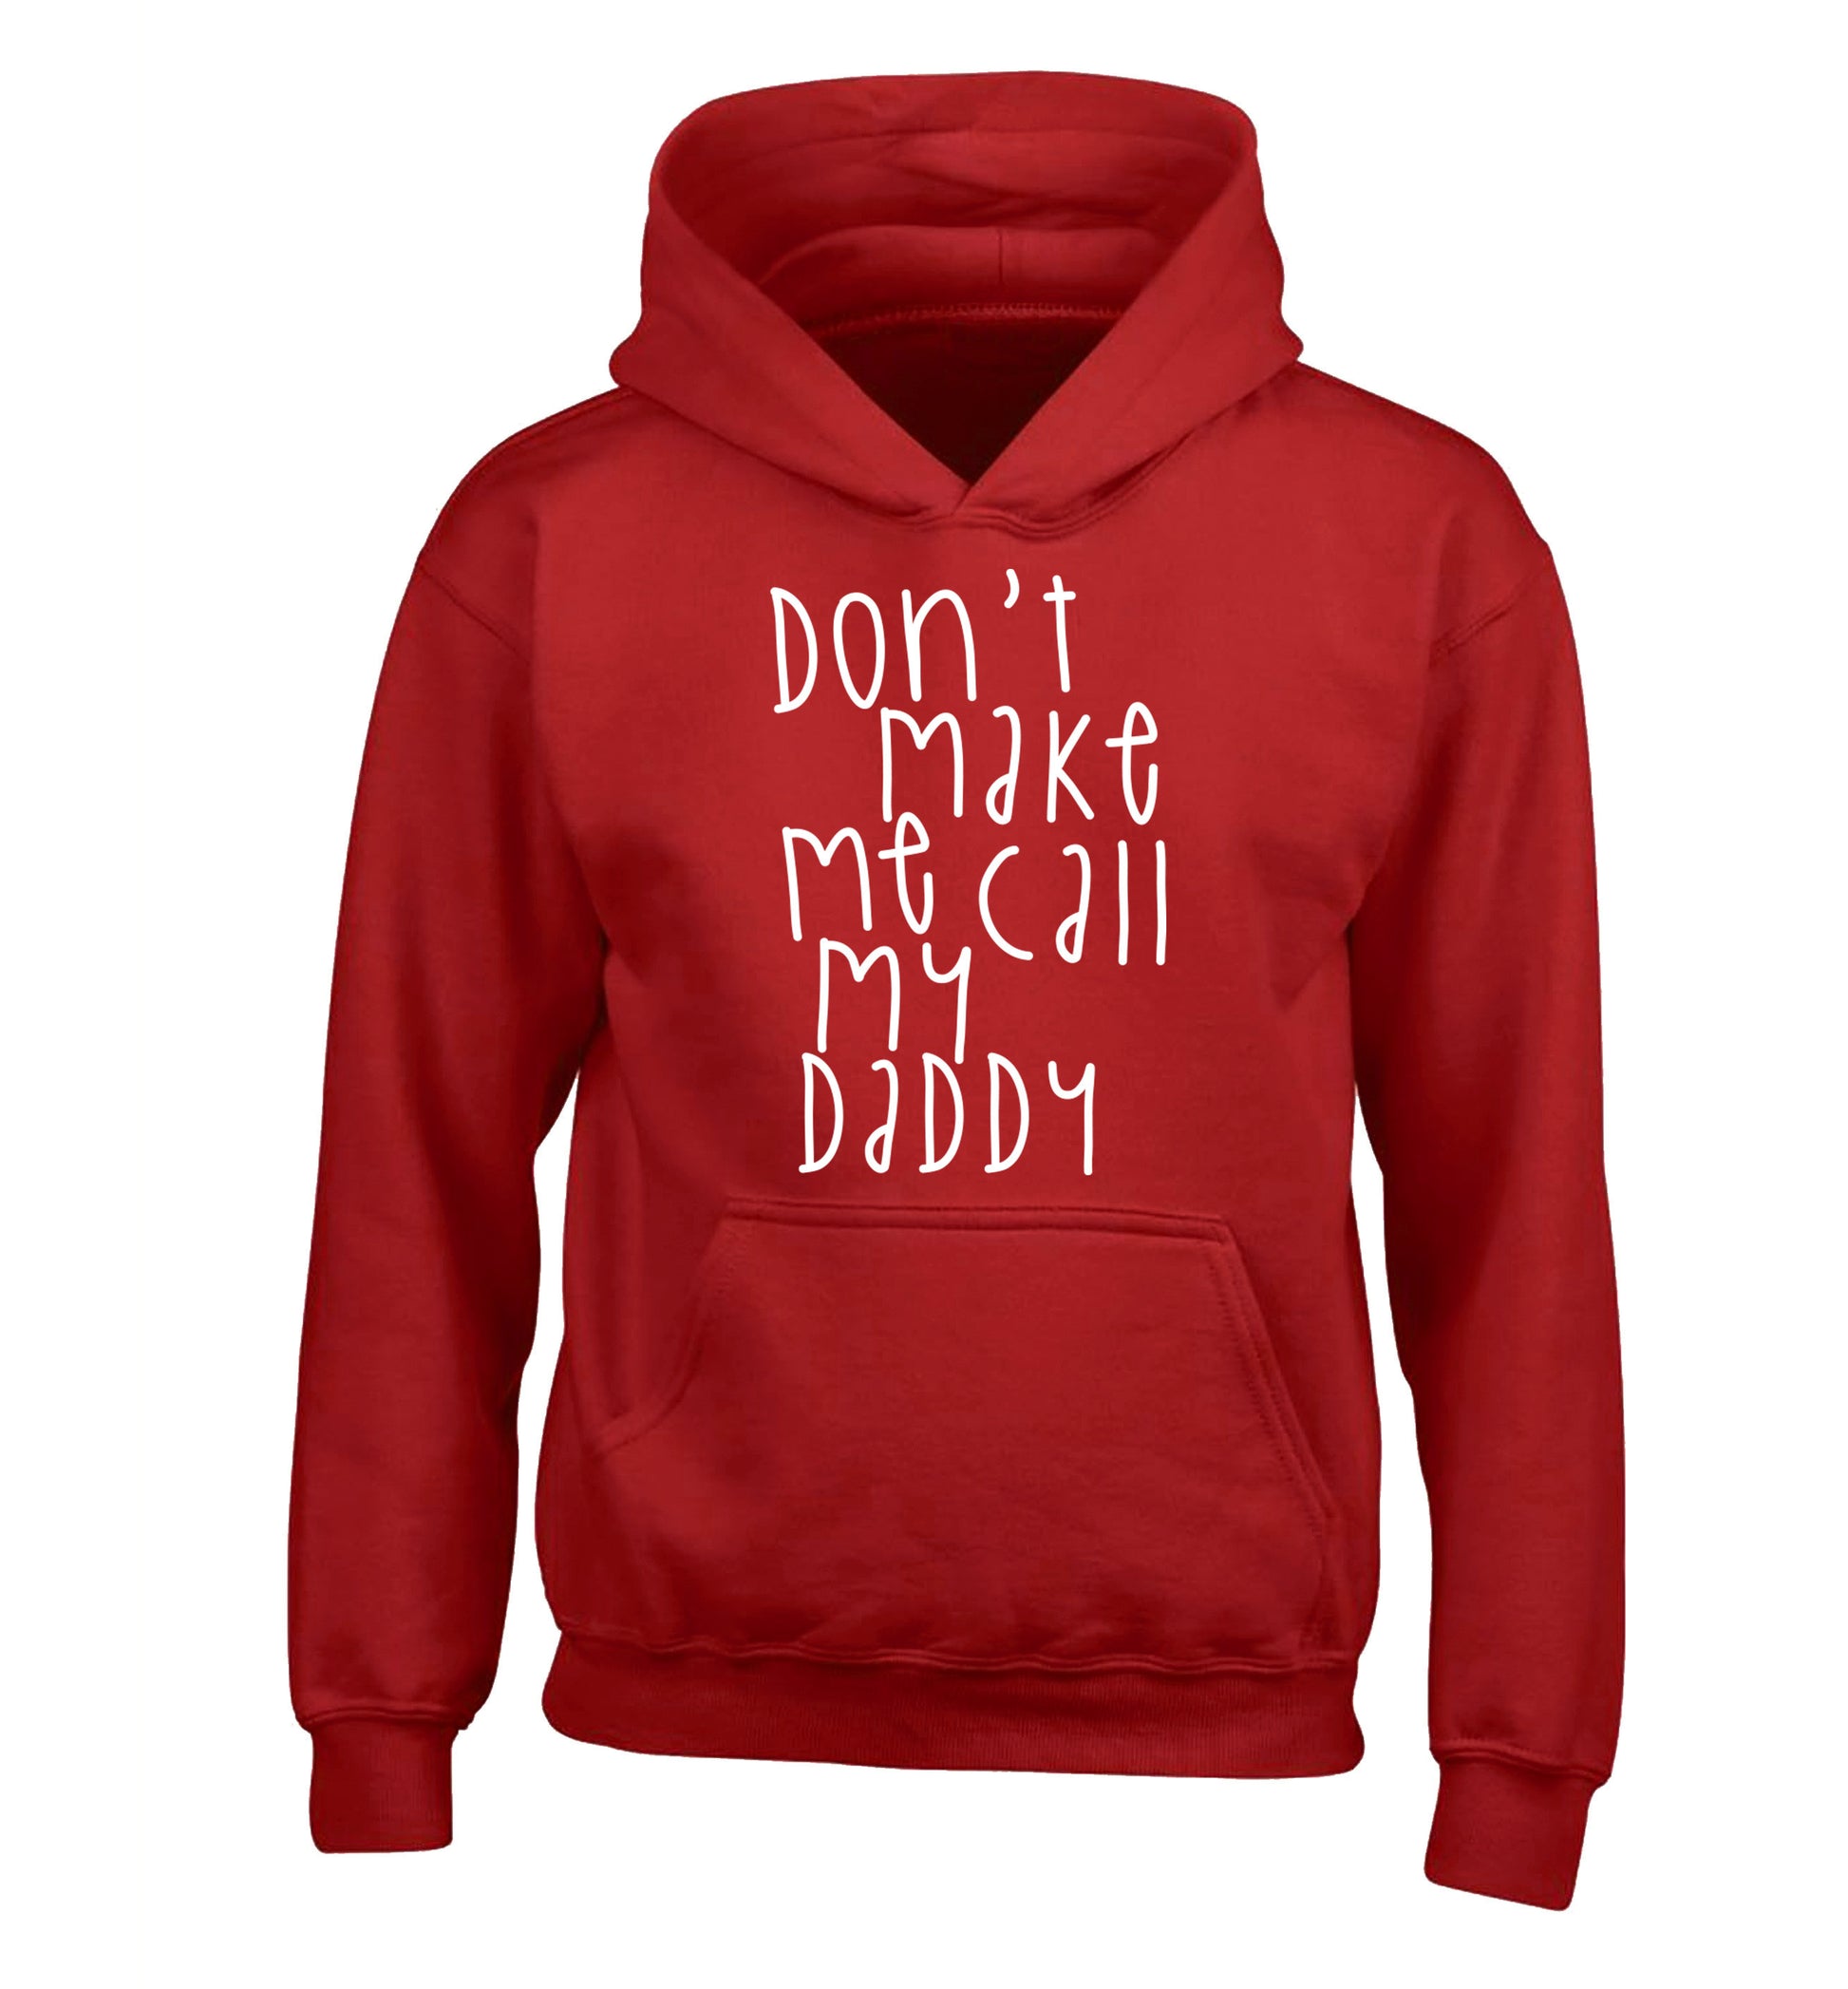 Don't make me call my daddy children's red hoodie 12-14 Years